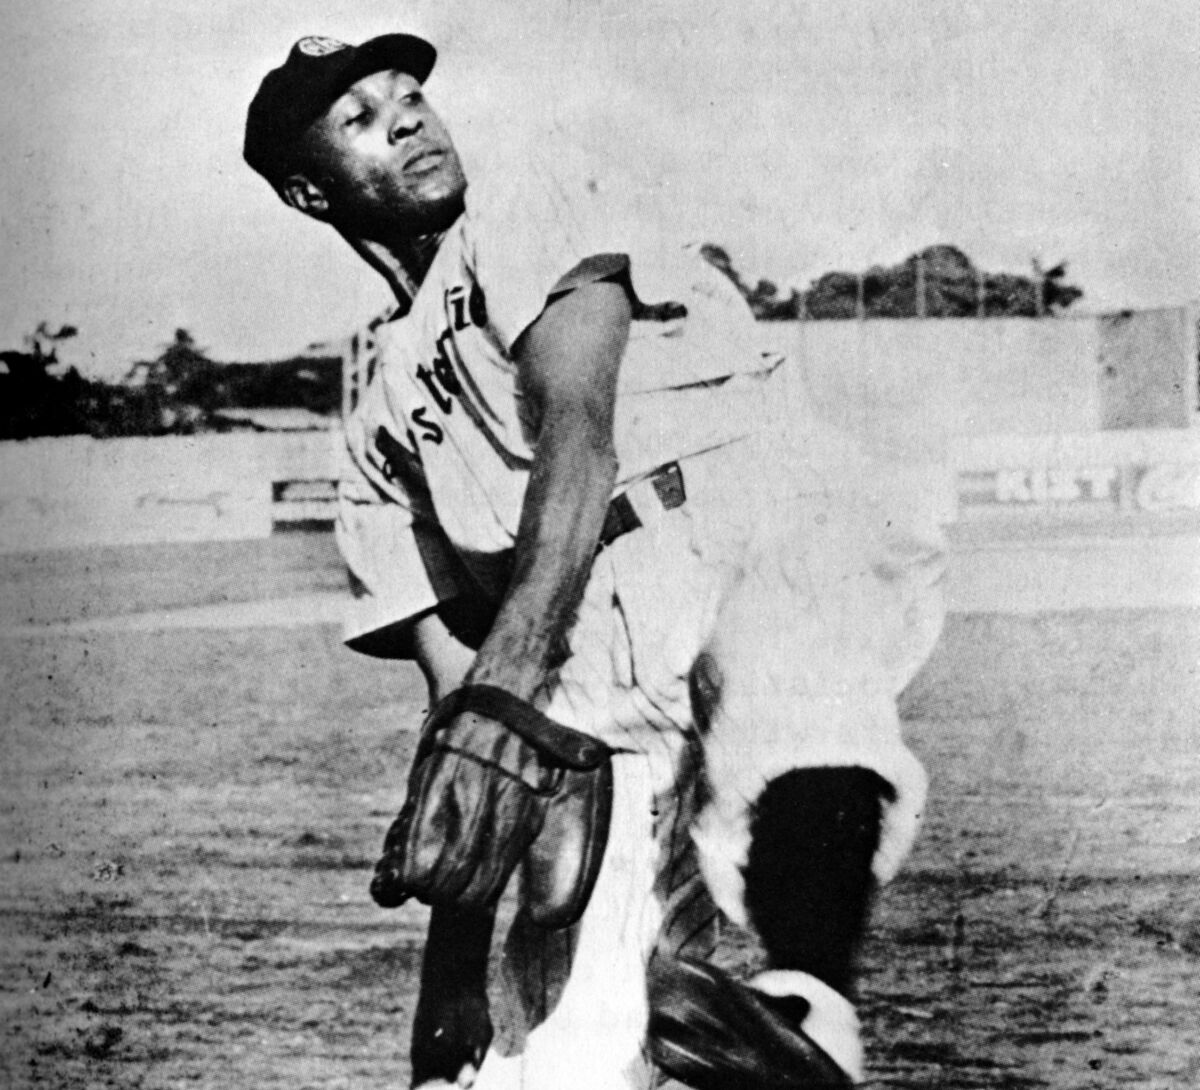 Chet Brewer, pitcher for the Estrellas Orientales of the Dominican Republic winter league, loosens up before a game in 1937.